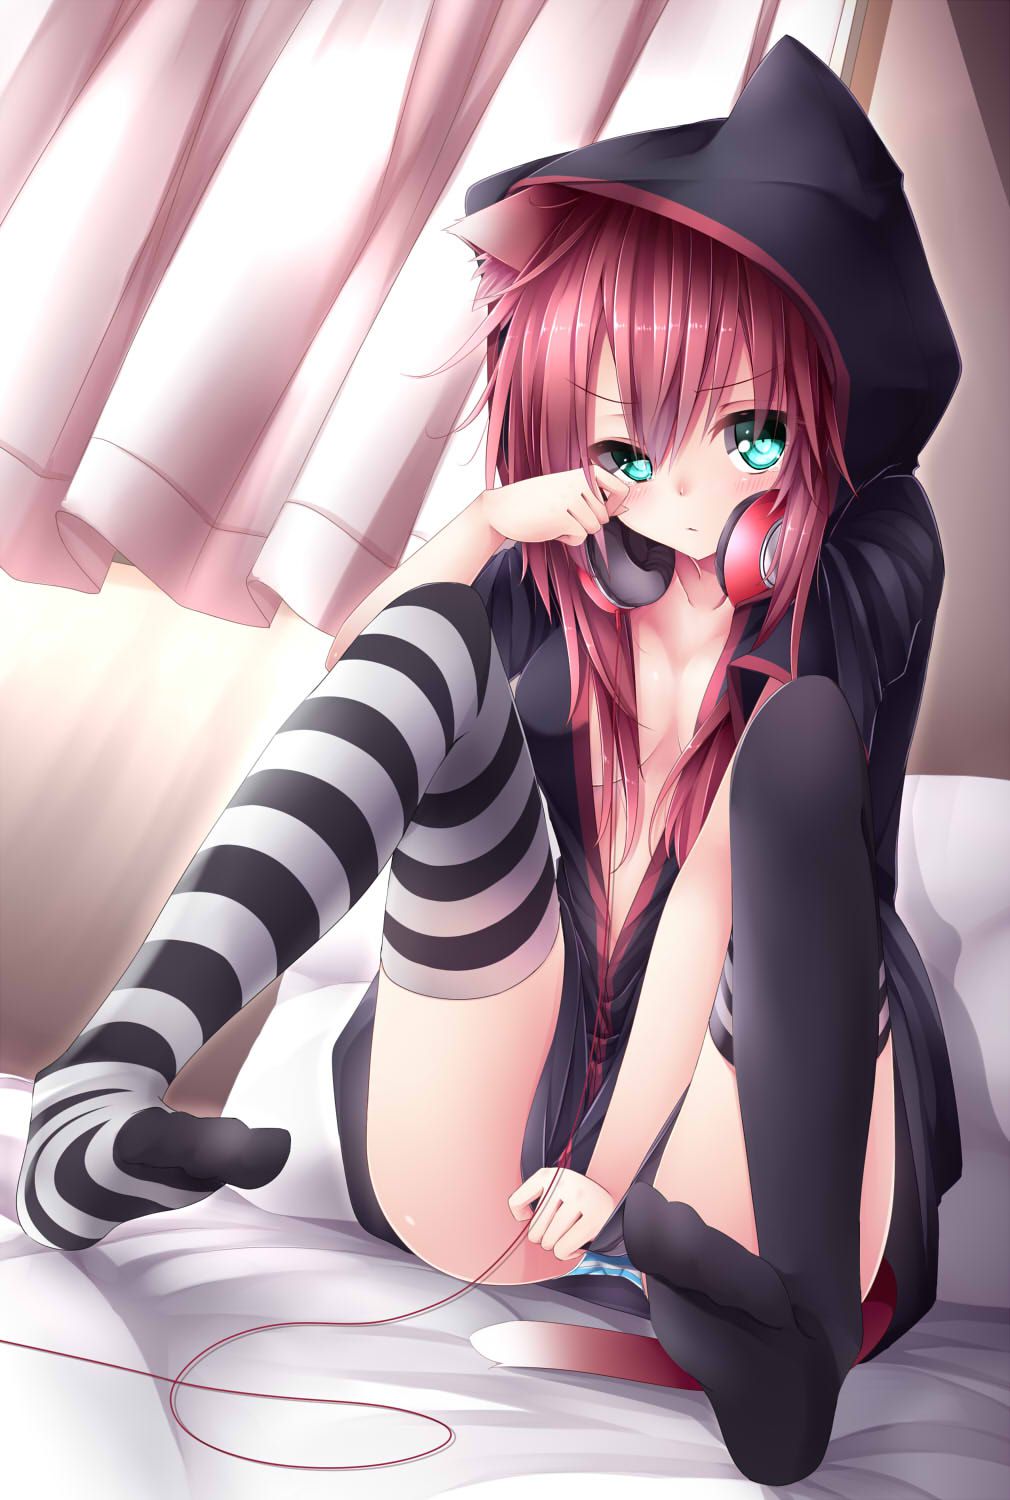 [Secondary] headphones x girl cute picture! 19